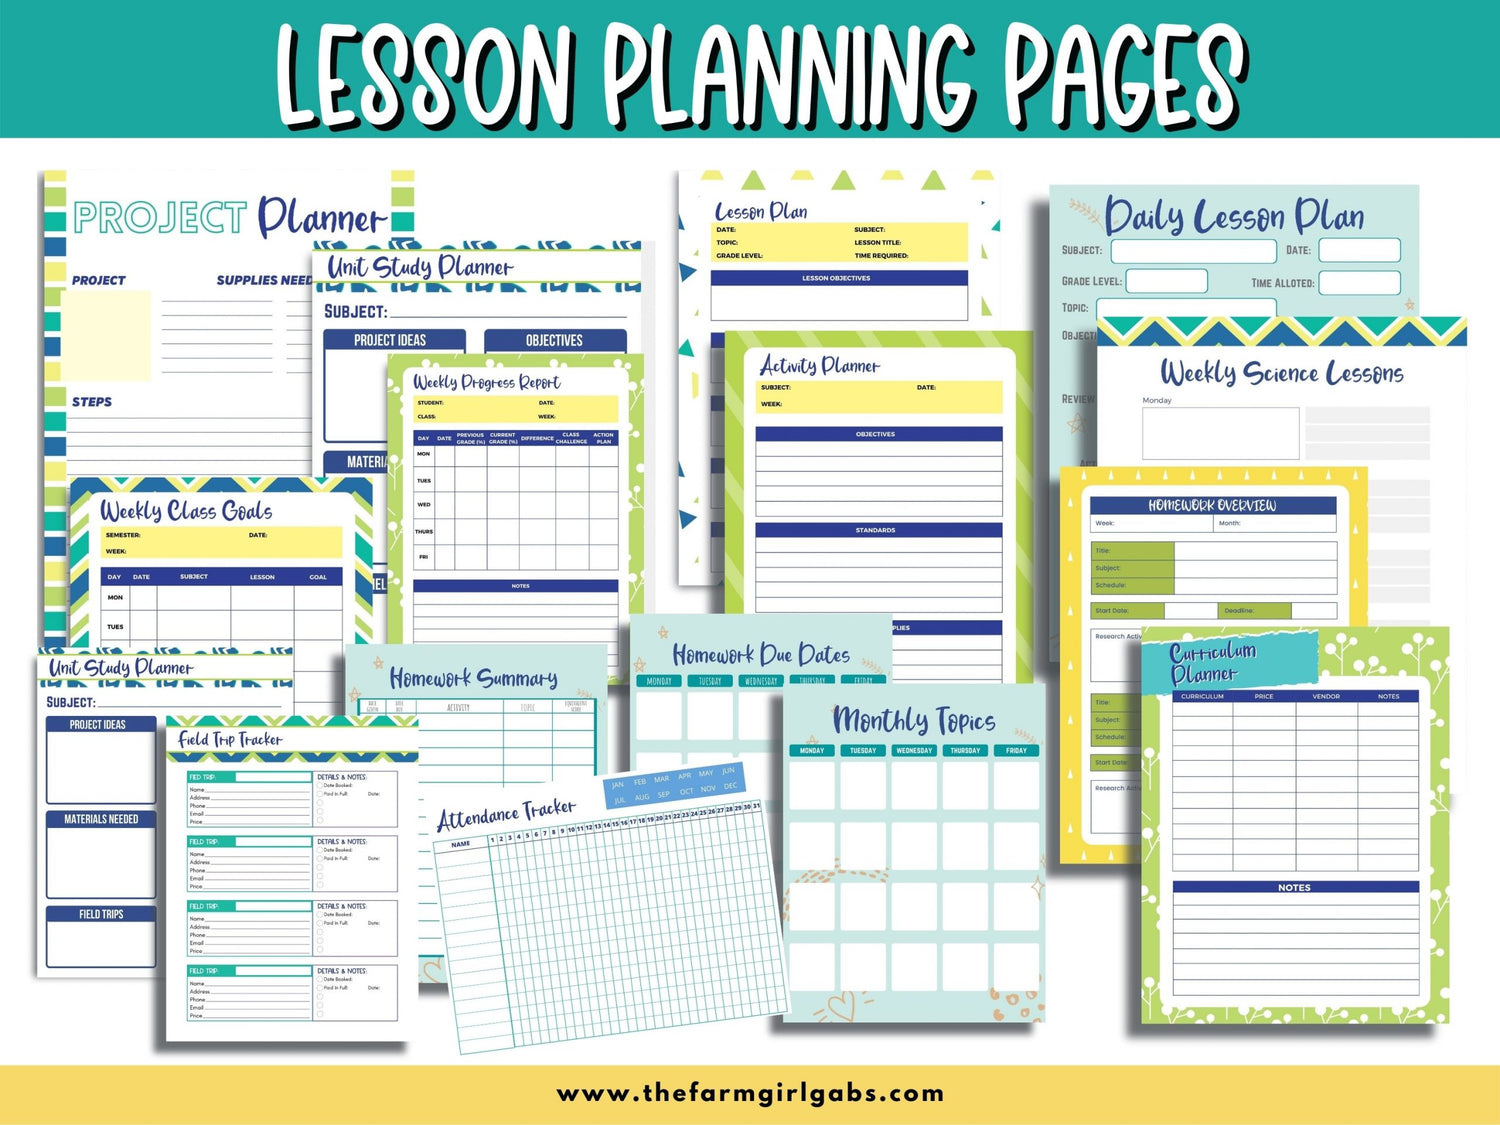 Start your homeschool year ready and organized. This 75-page printable homeschool planner has all the information you need to plan a successful school year for your kids. This Ultimate Homeschool Planner Bundle will help you plan your days, weeks and year and track your success. This printable student planner comes in four sizes. Plan out the entire school year with this easy to use school planner.